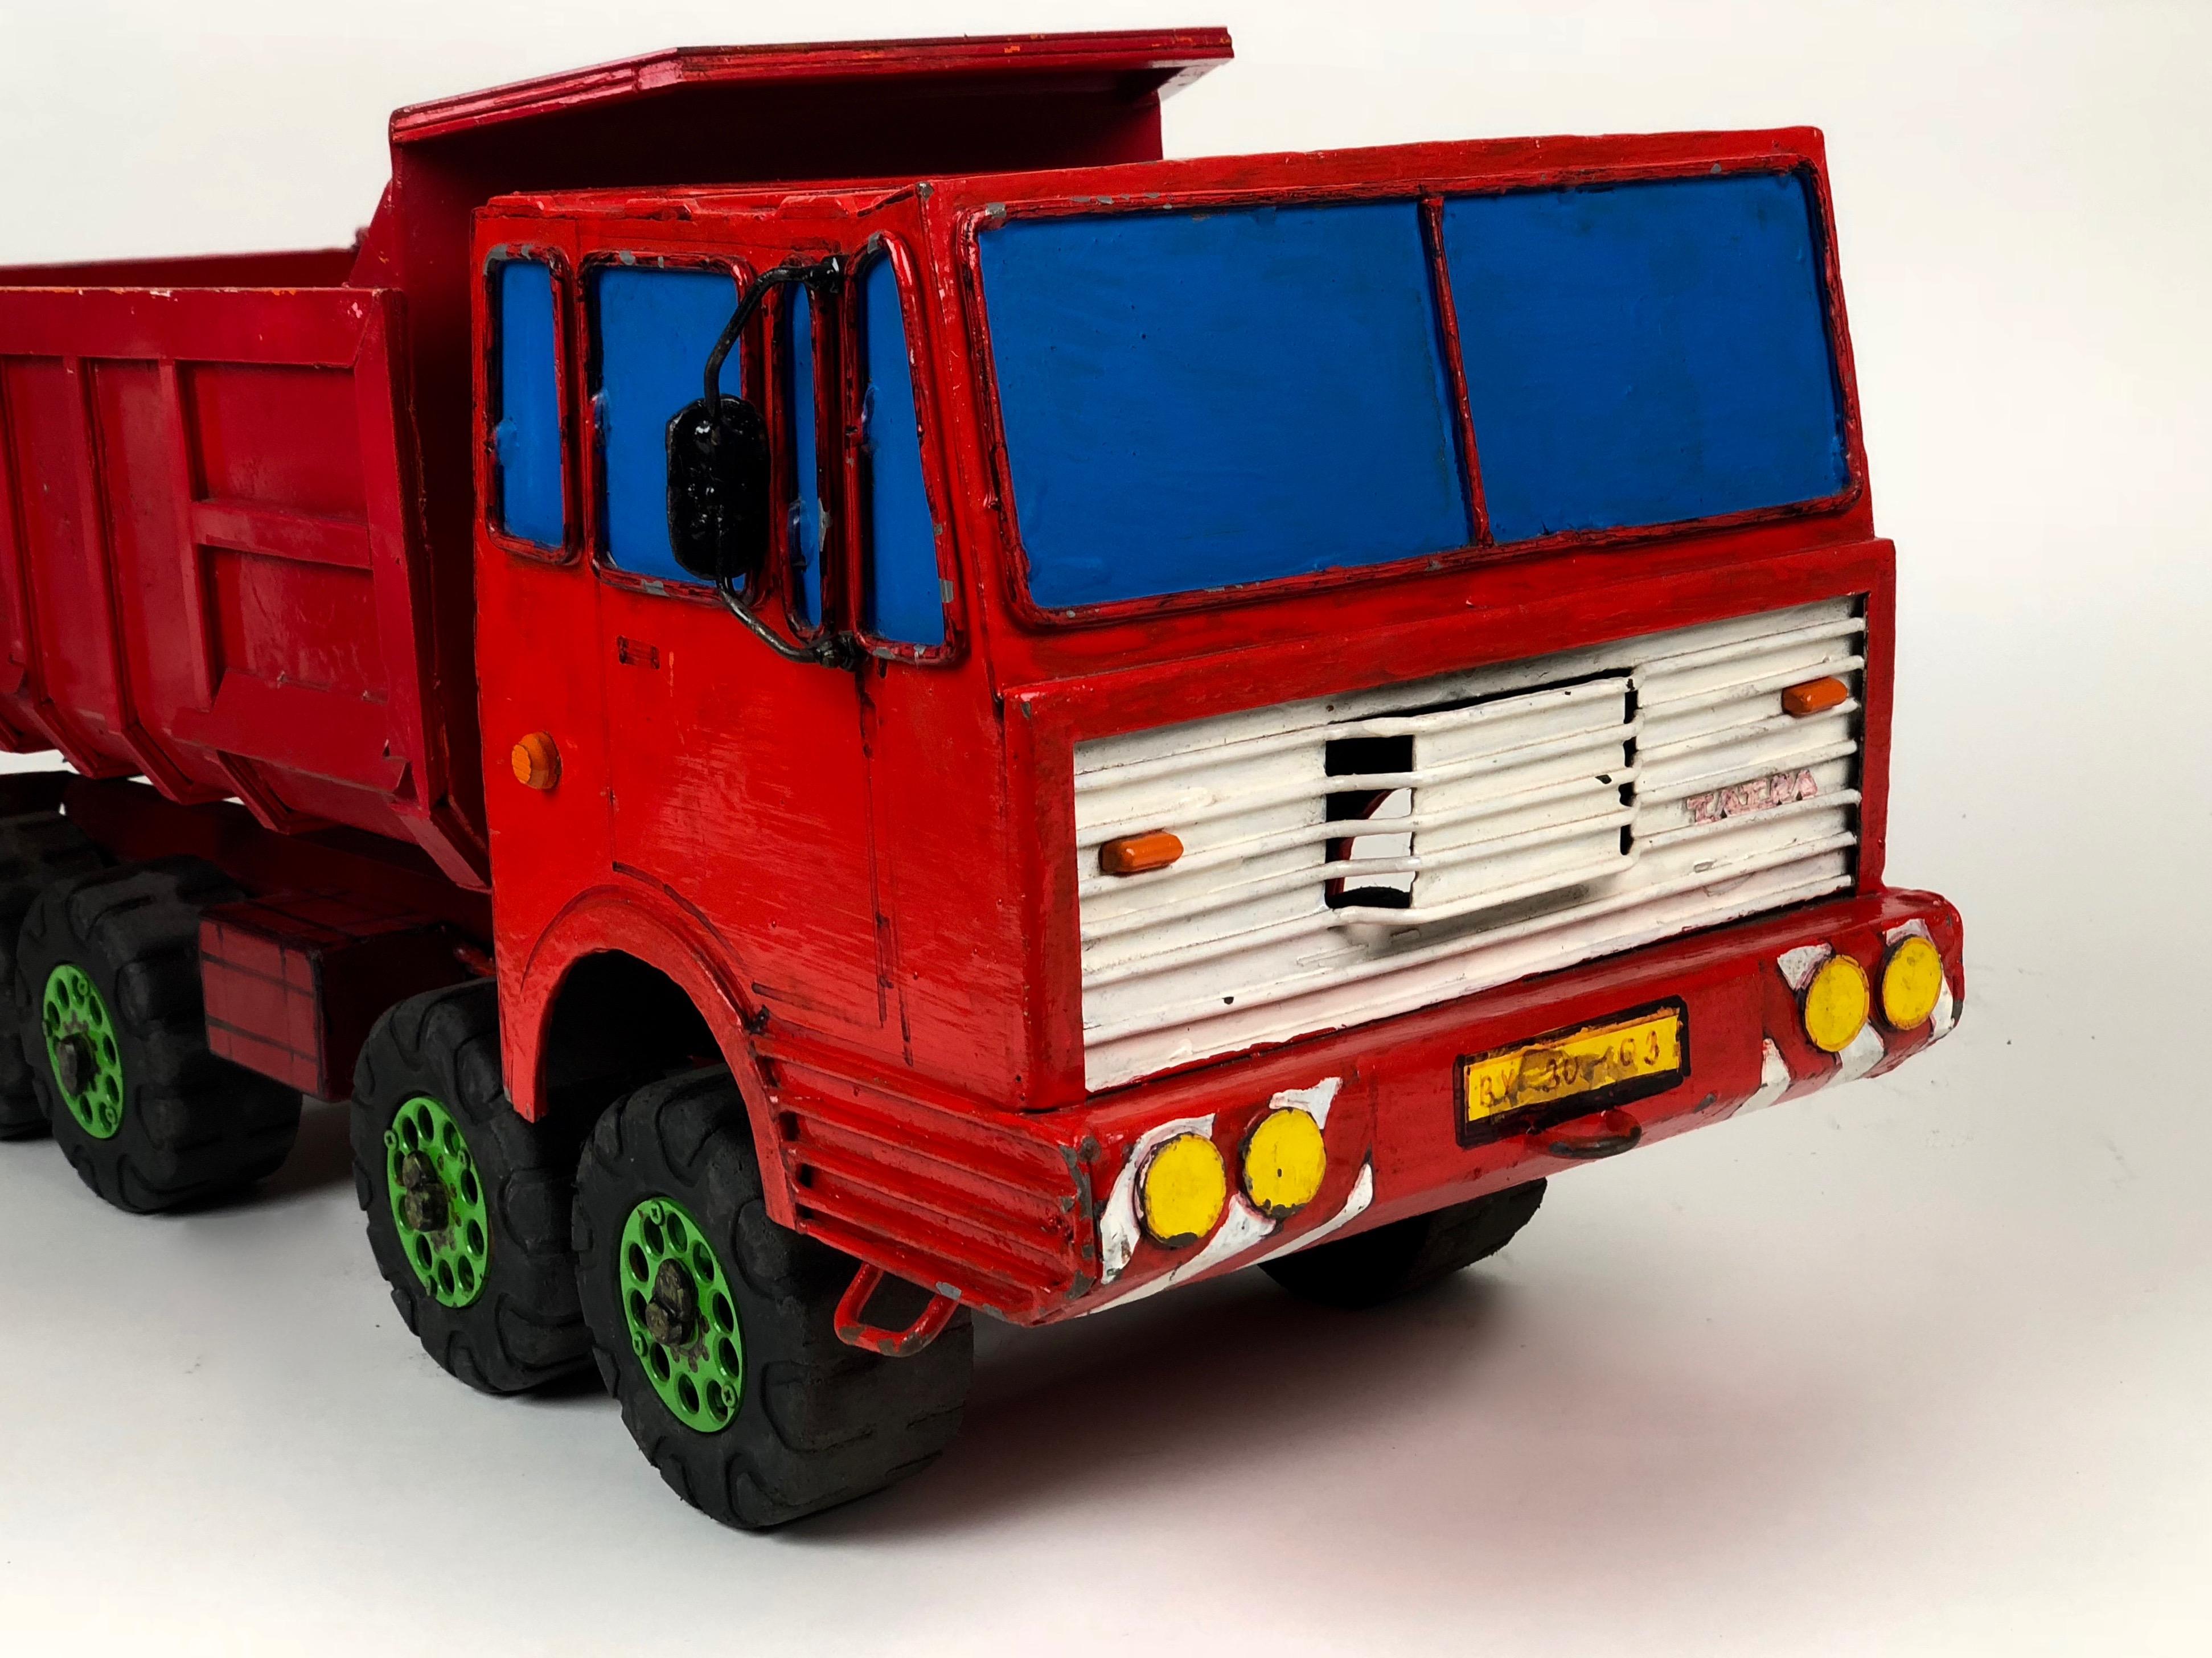 Slovak Tatra Truck Model from 1980s For Sale